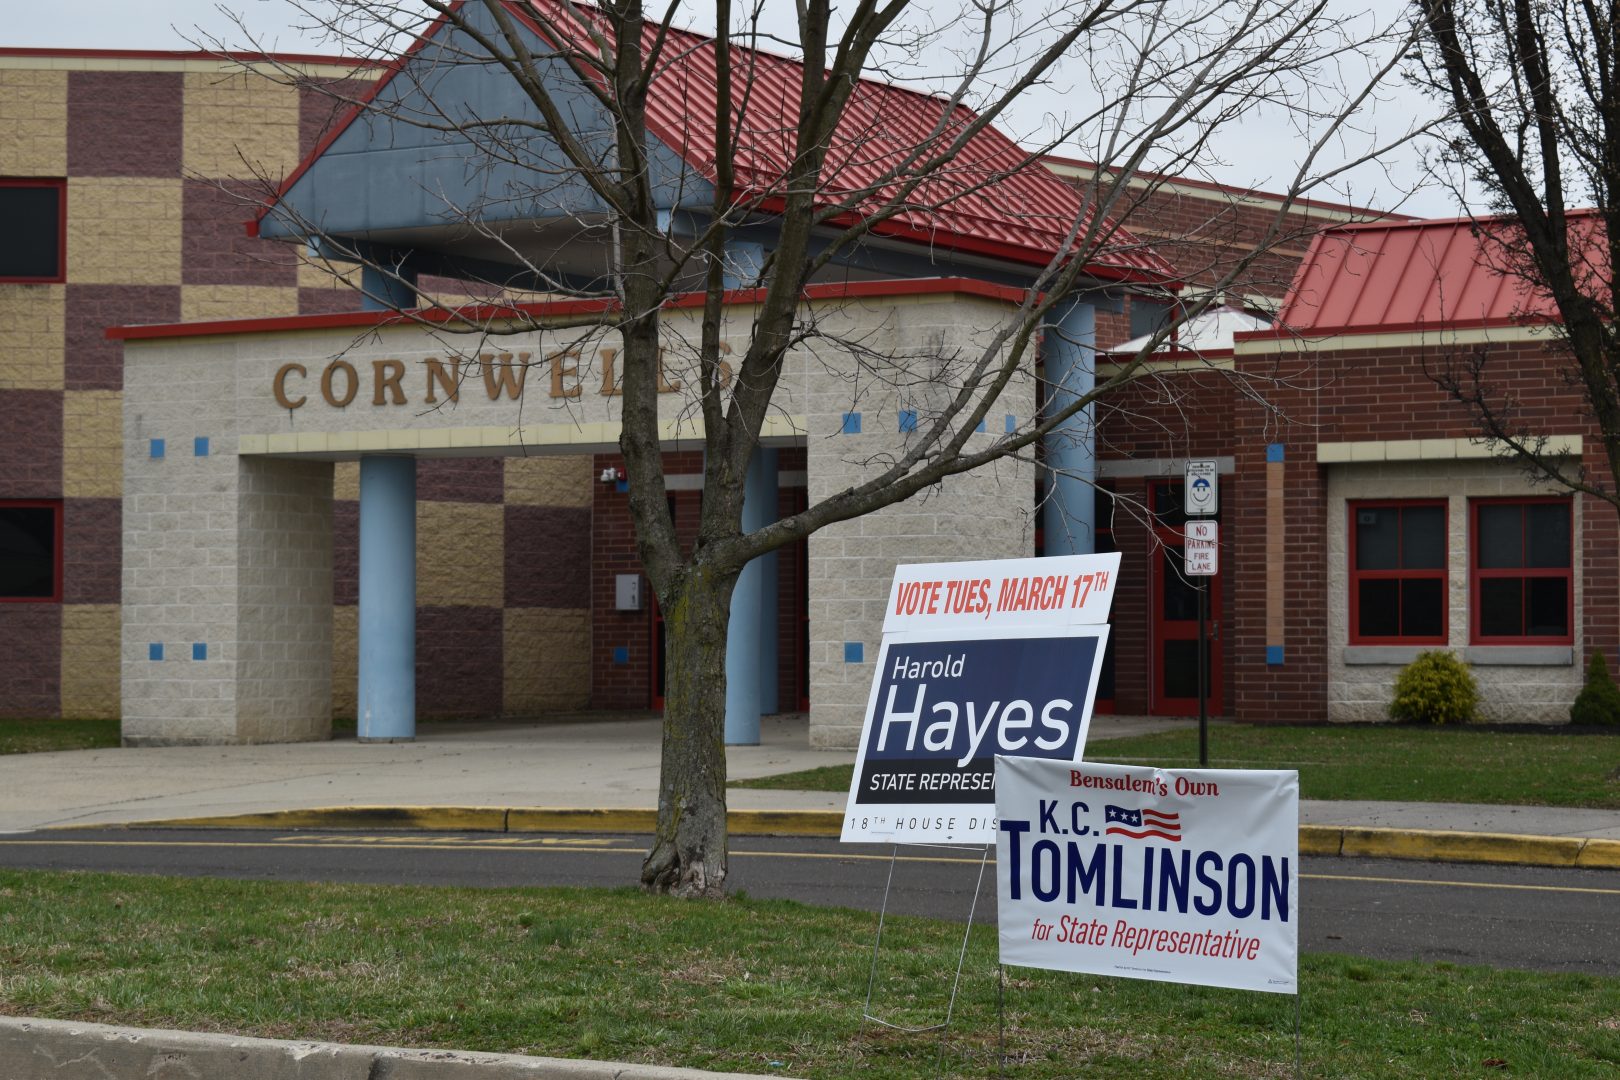 Republican K.C. Tomlinson won the special election for state House of Representatives 18th district in Bensalem Township (Bucks County). Cornwell Elementary School, closed along with others across Pennsylvania, hosted voting for Bensalem’s Lower Middle districts 2 and 3. Despite the COVID-19 outbreak, turnout for the contest district-wide was up to 20 percent, from 12 percent at its last special election four years ago.